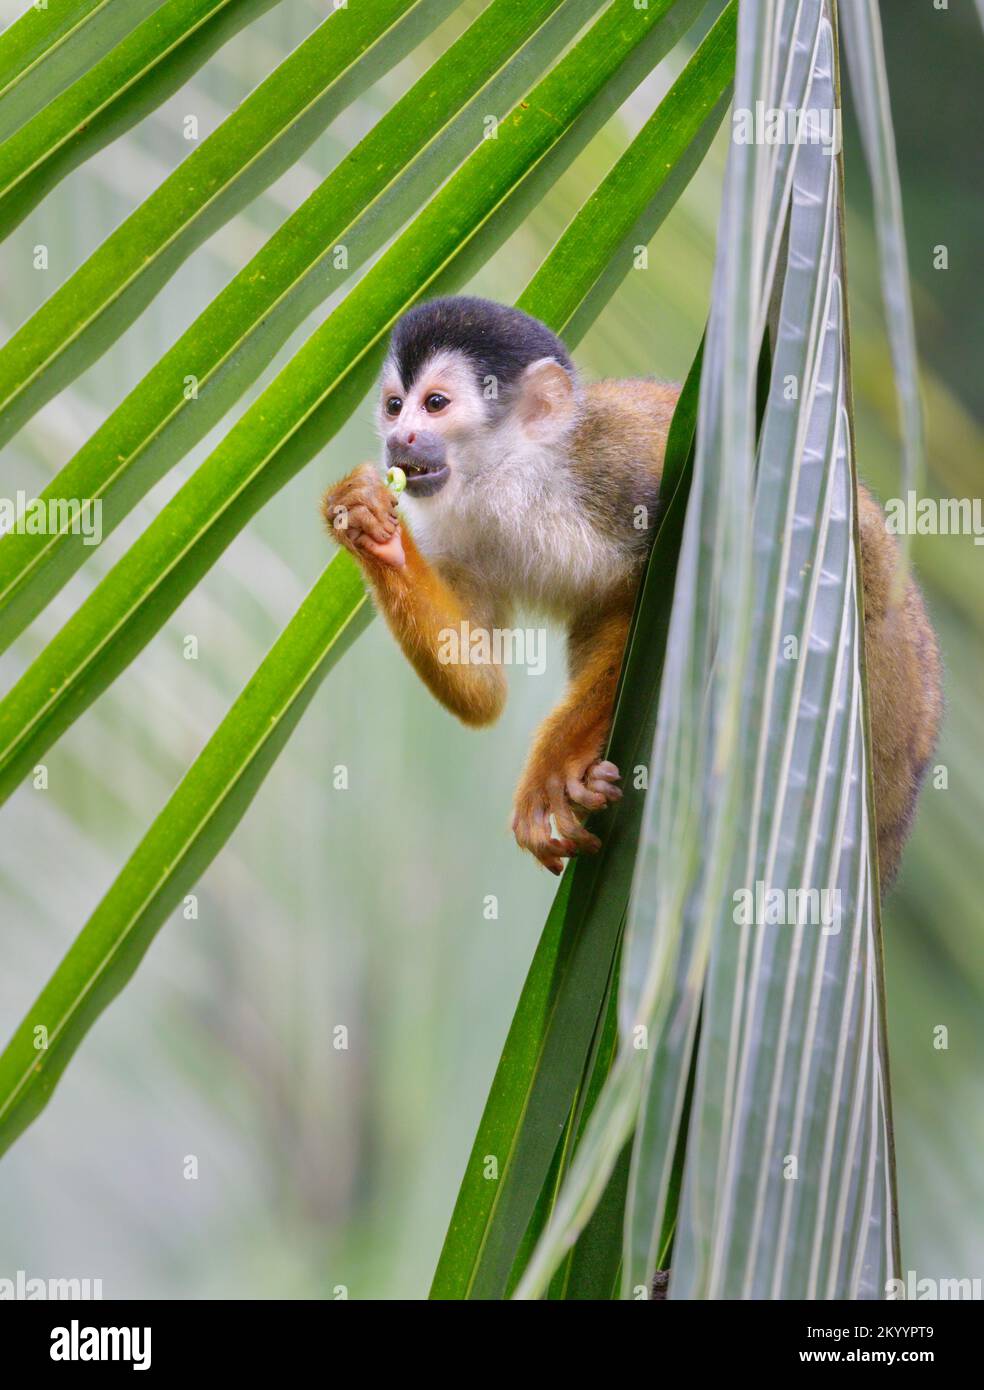 Central American or Red-Backed Squirrel Monkey (Saimiri oerstedii) eating a grasshopper in palm tree, Osa peninsula, Puntarenas, Costa Rica. Stock Photo